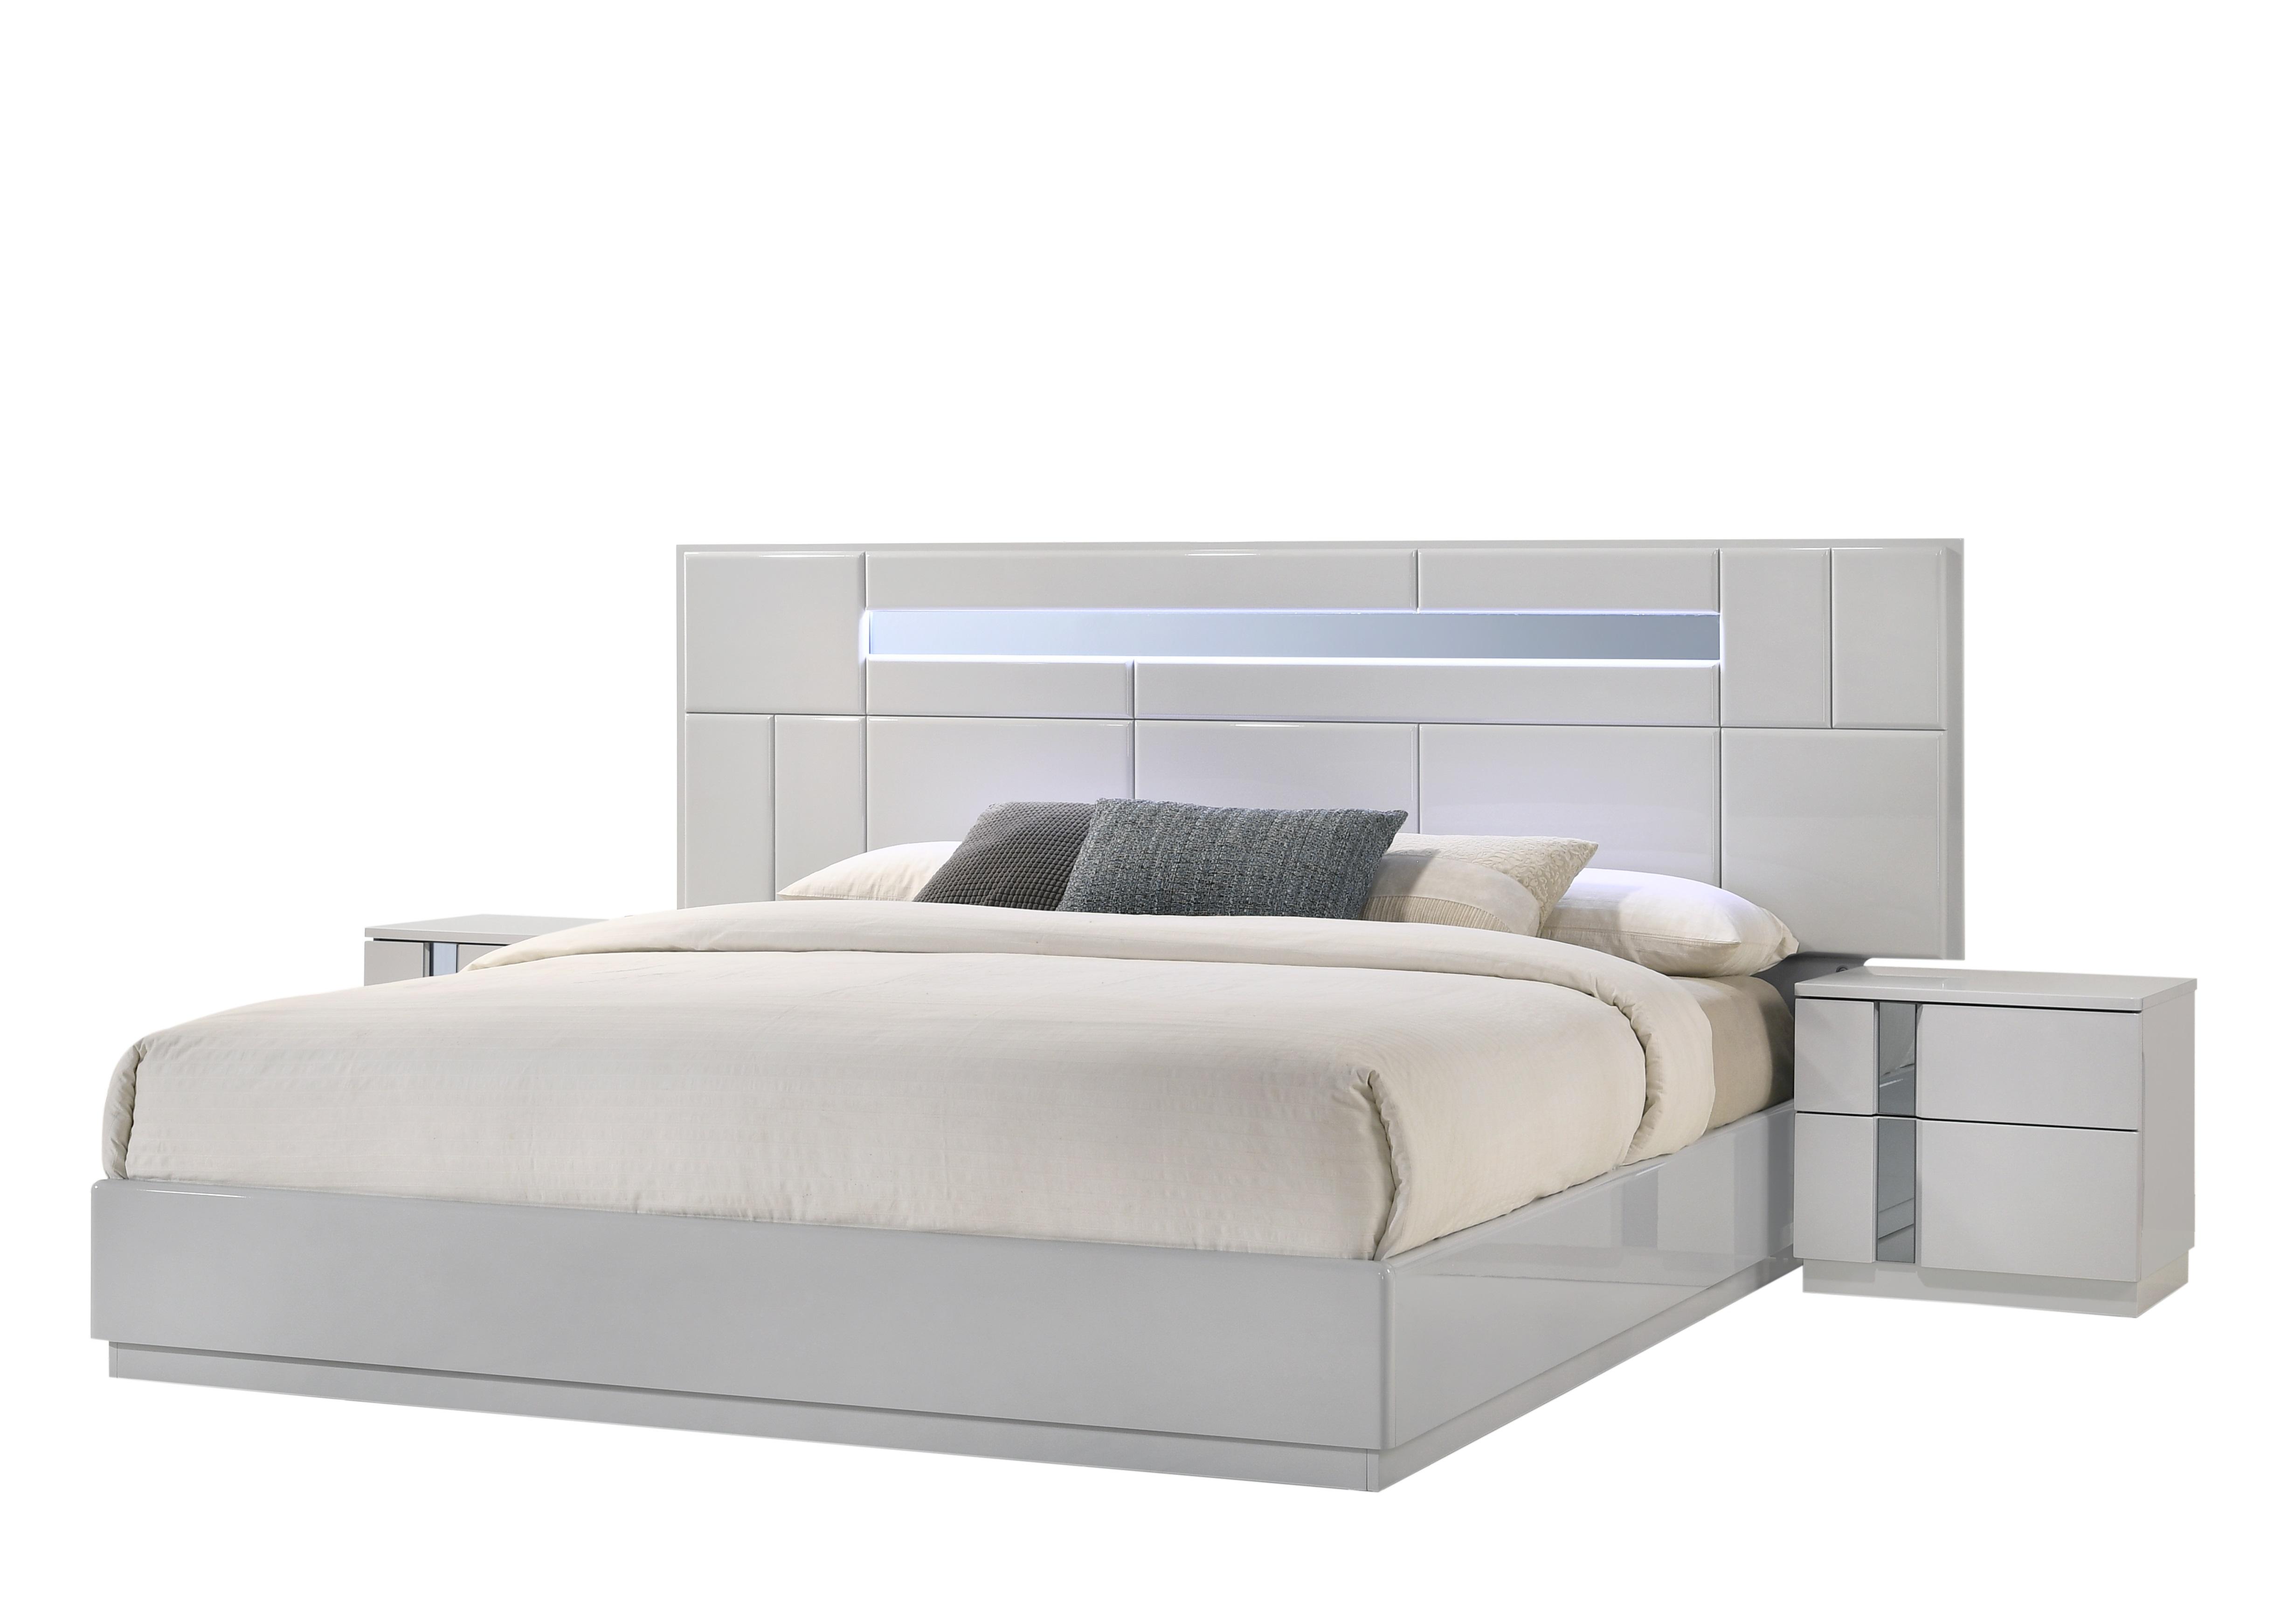 

    
Contemporary King Bedroom Set in Gray Lacquer and Chrome Set 5Pcs J&M Palermo
